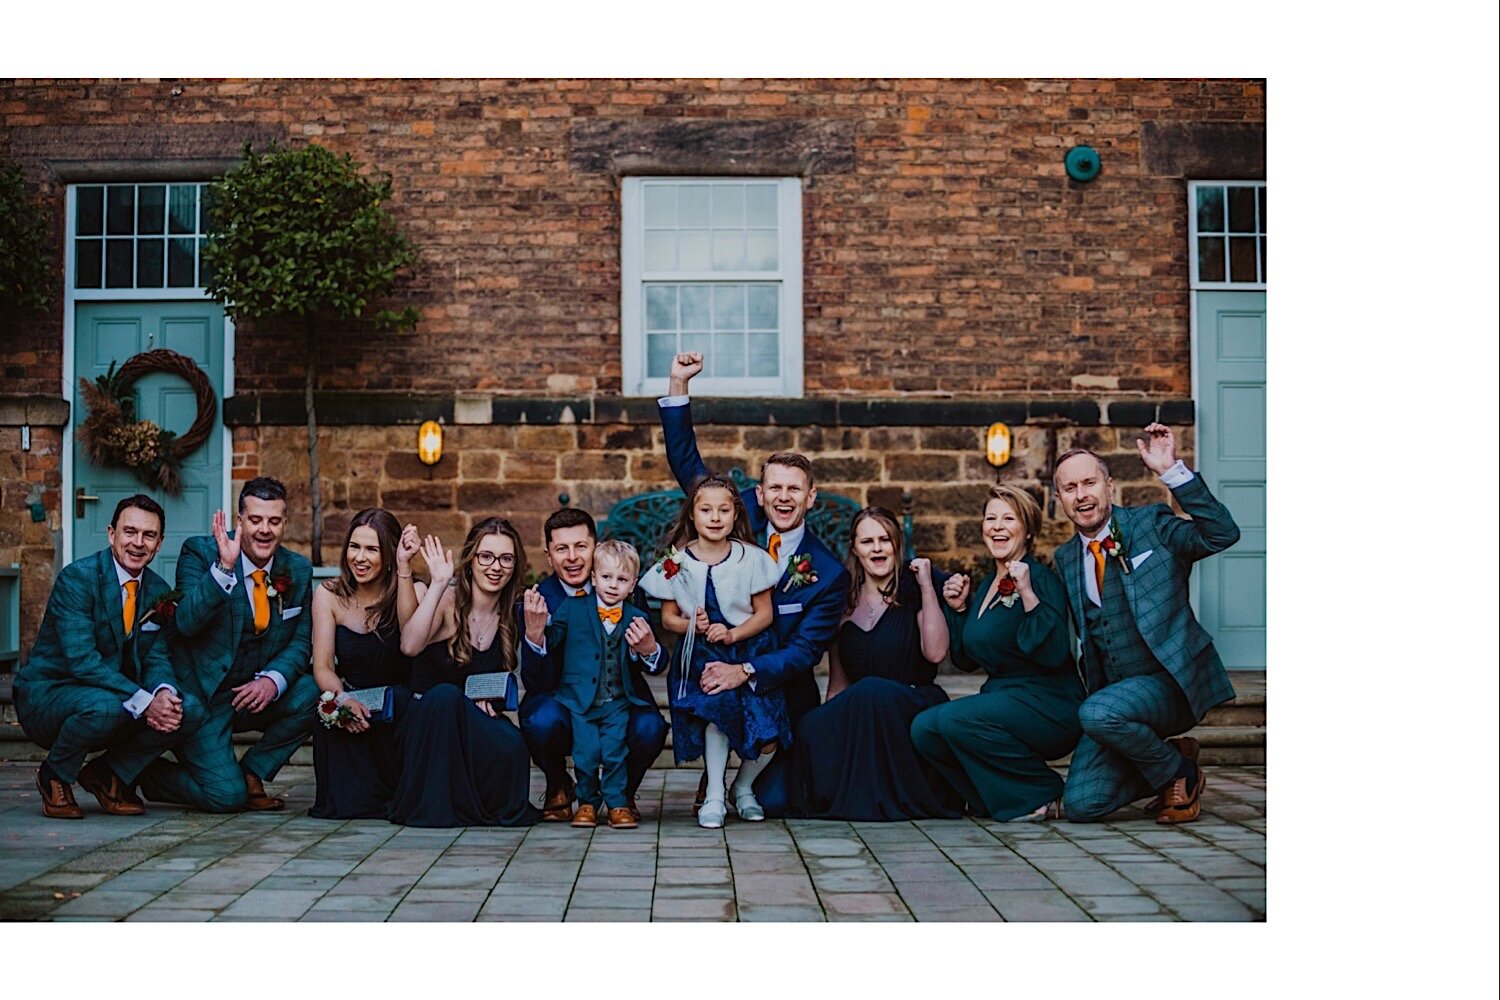 54_TWS-512_photographer_wedding_industrial_venue_groups_photography_chic_westmill_derby.jpg